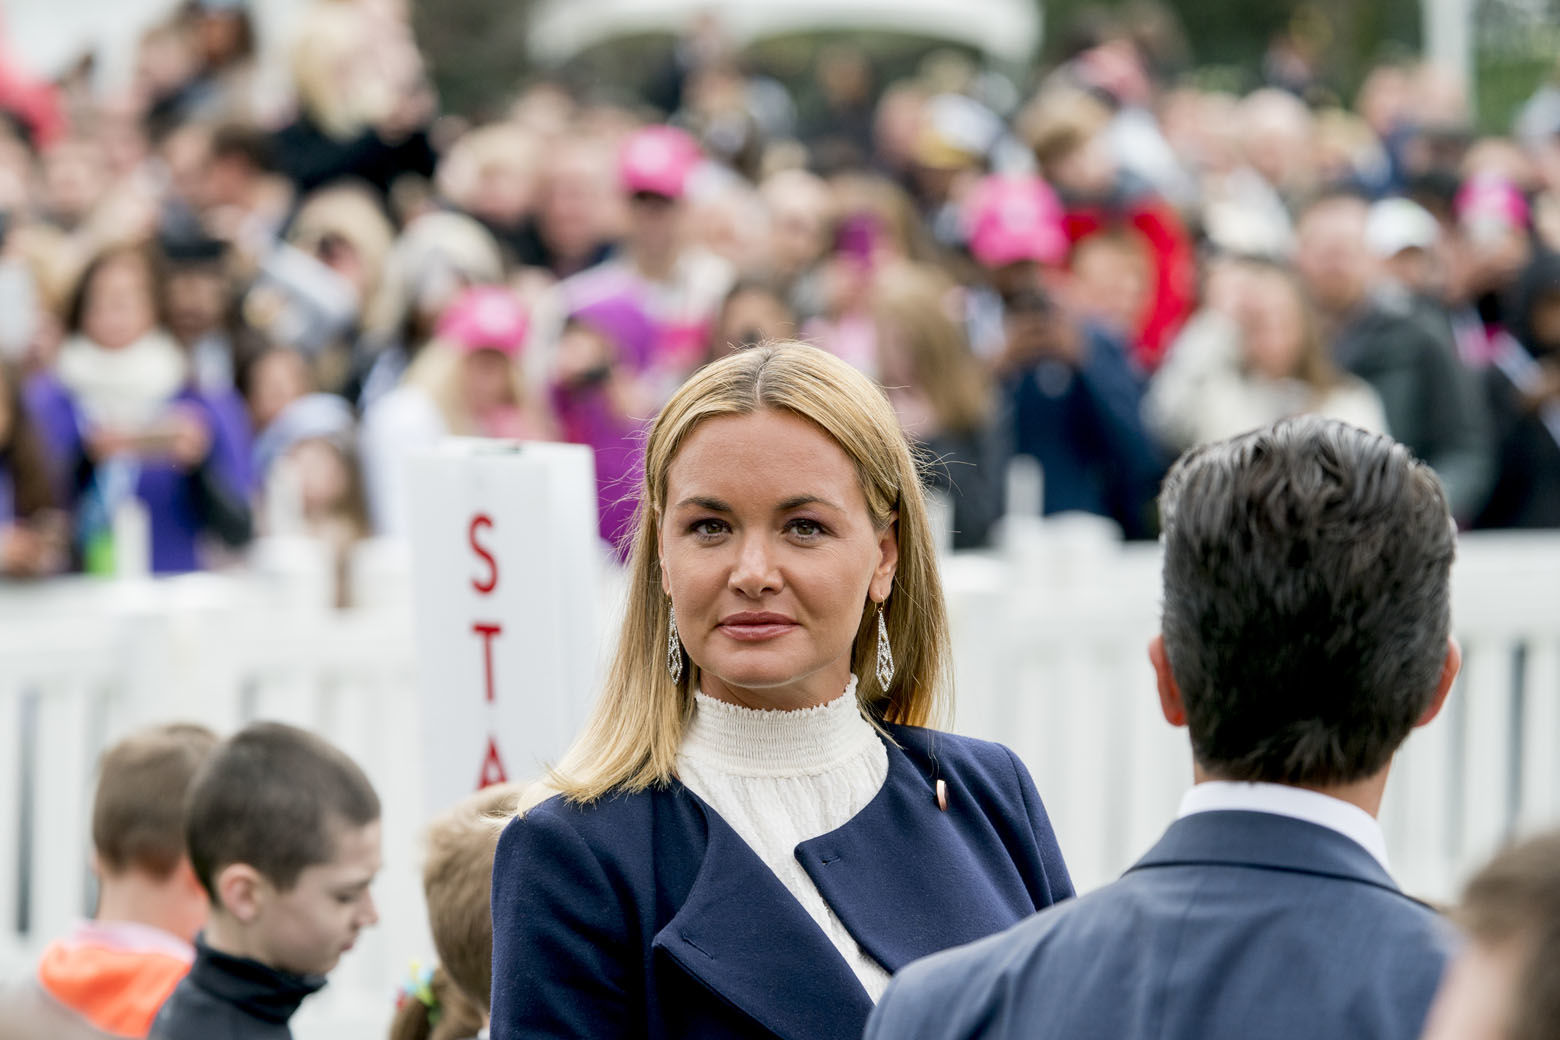 Donald Trump Jr., the son of President Donald Trump, right, and his wife Vanessa Trump, center, attend the annual White House Easter Egg Roll on the South Lawn of the White House in Washington, Monday, April 2, 2018. (AP Photo/Andrew Harnik)